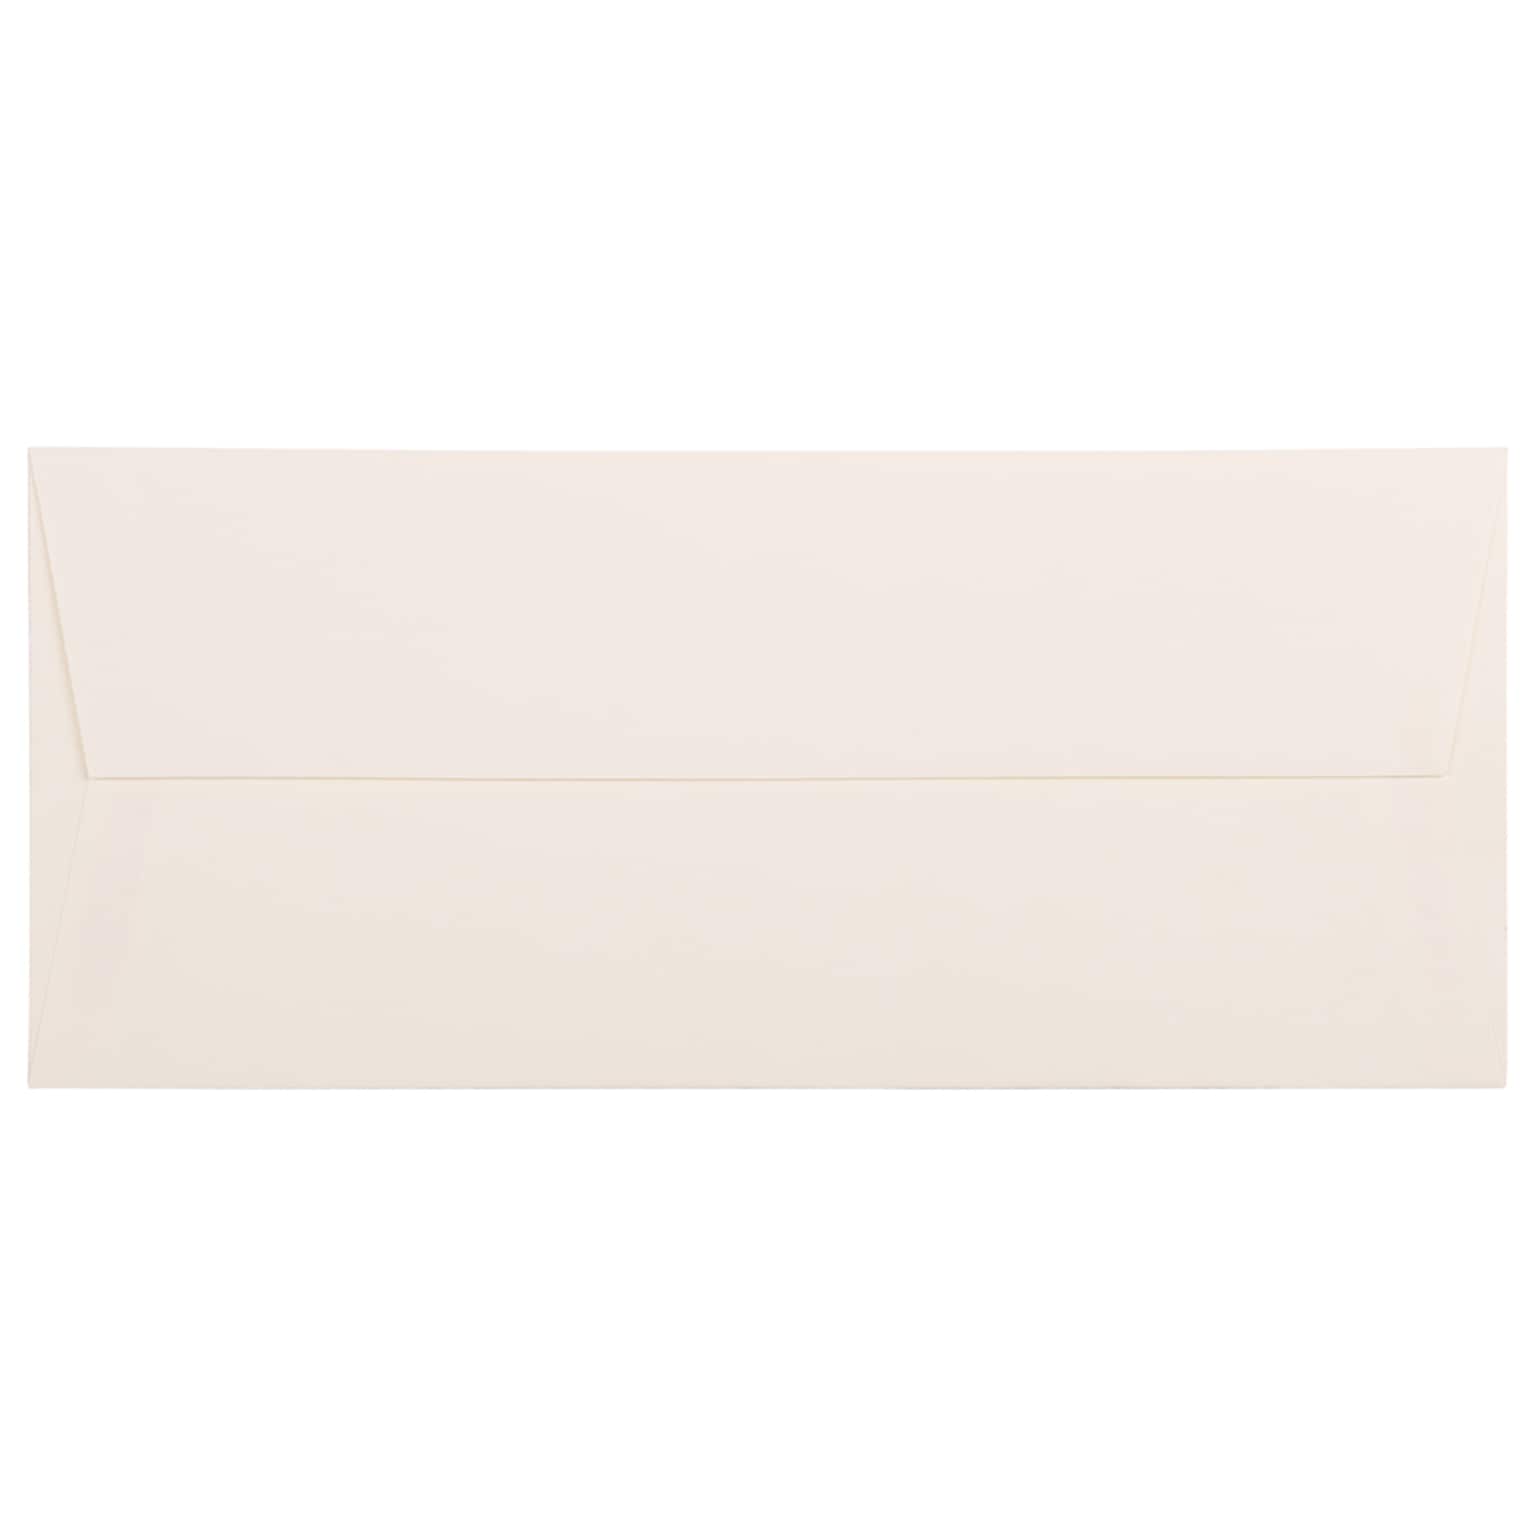 JAM Paper Strathmore Open End #10 Business Envelope, 4 1/8 x 9 1/2, Natural White Wove, 50/Pack (34992I)